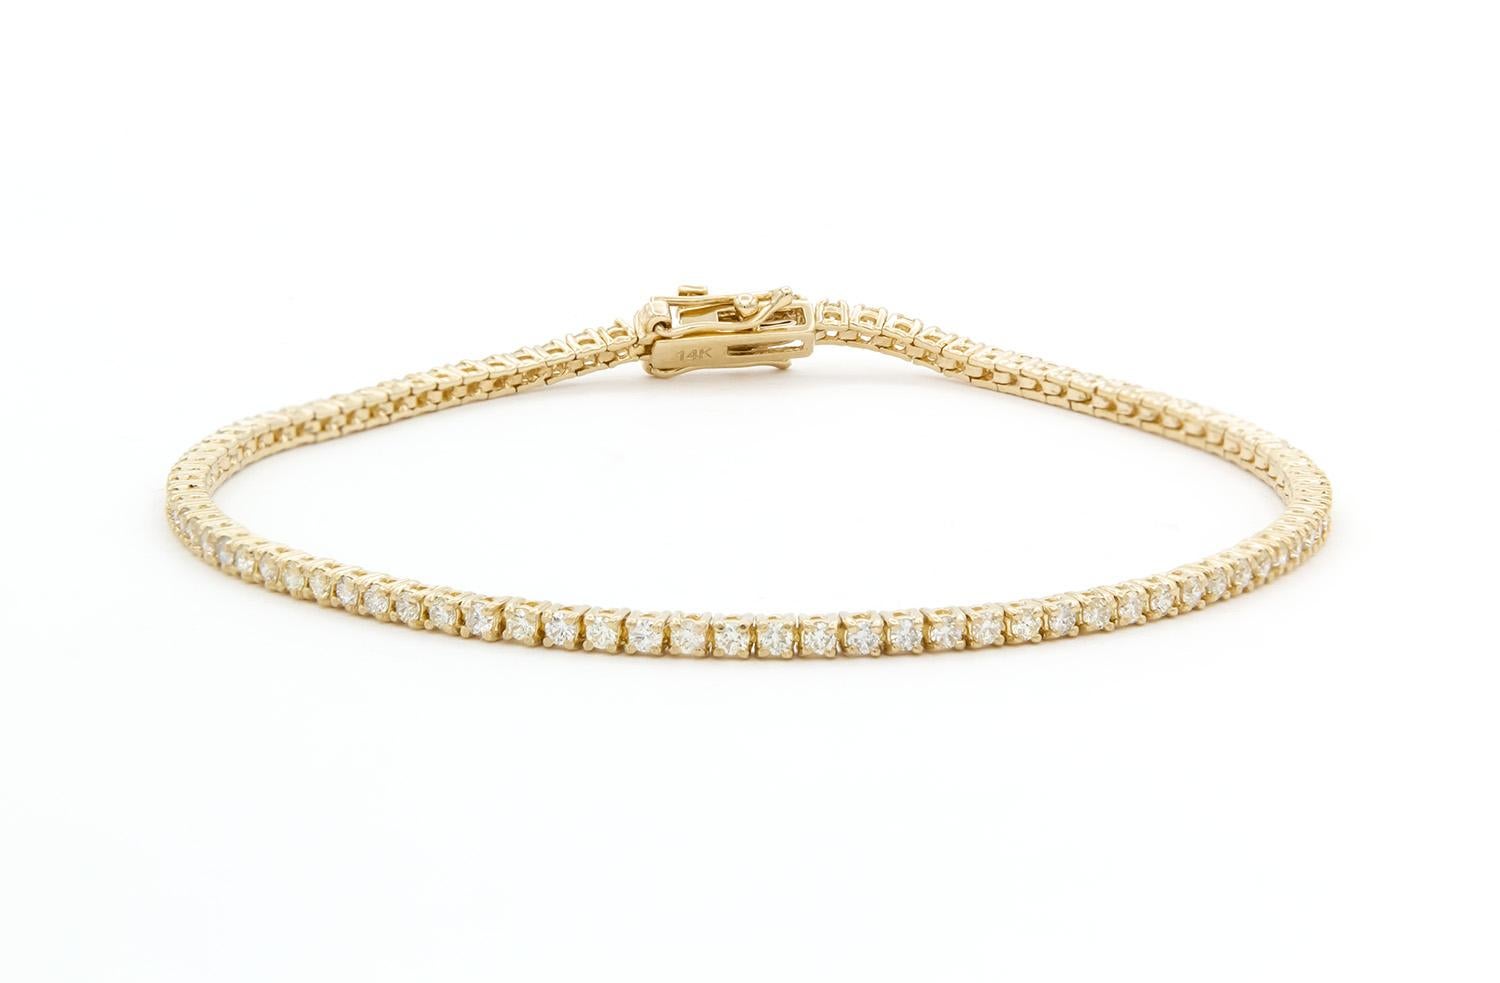 We are pleased to present this beautiful Brand New 14k Yellow Gold & Diamond Tennis Bracelet. It features 1.39ctw G-H/VS2-SI1 Round Brilliant Cut Diamonds set in this 14k yellow gold tennis bracelet. The bracelet measures 7″ long and features a push